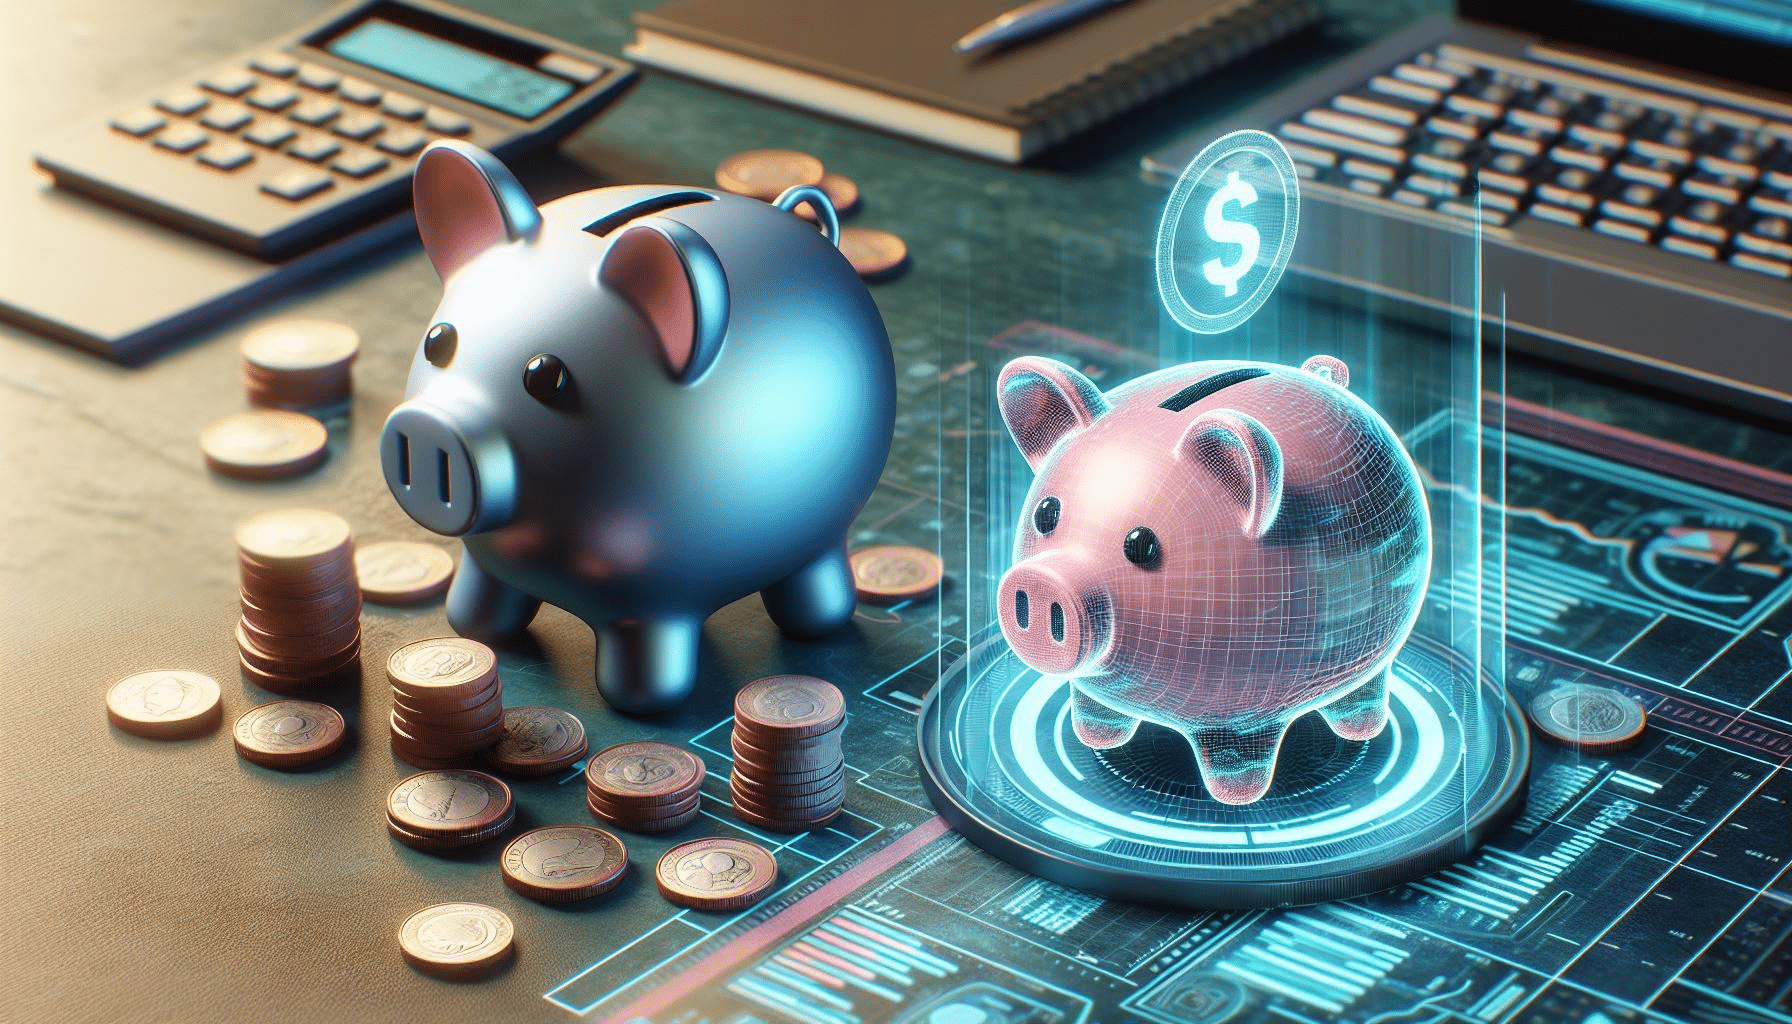 Digital Twins concept illustrated by a physical piggy bank and its digital holographic counterpart on a coin-strewn surface.